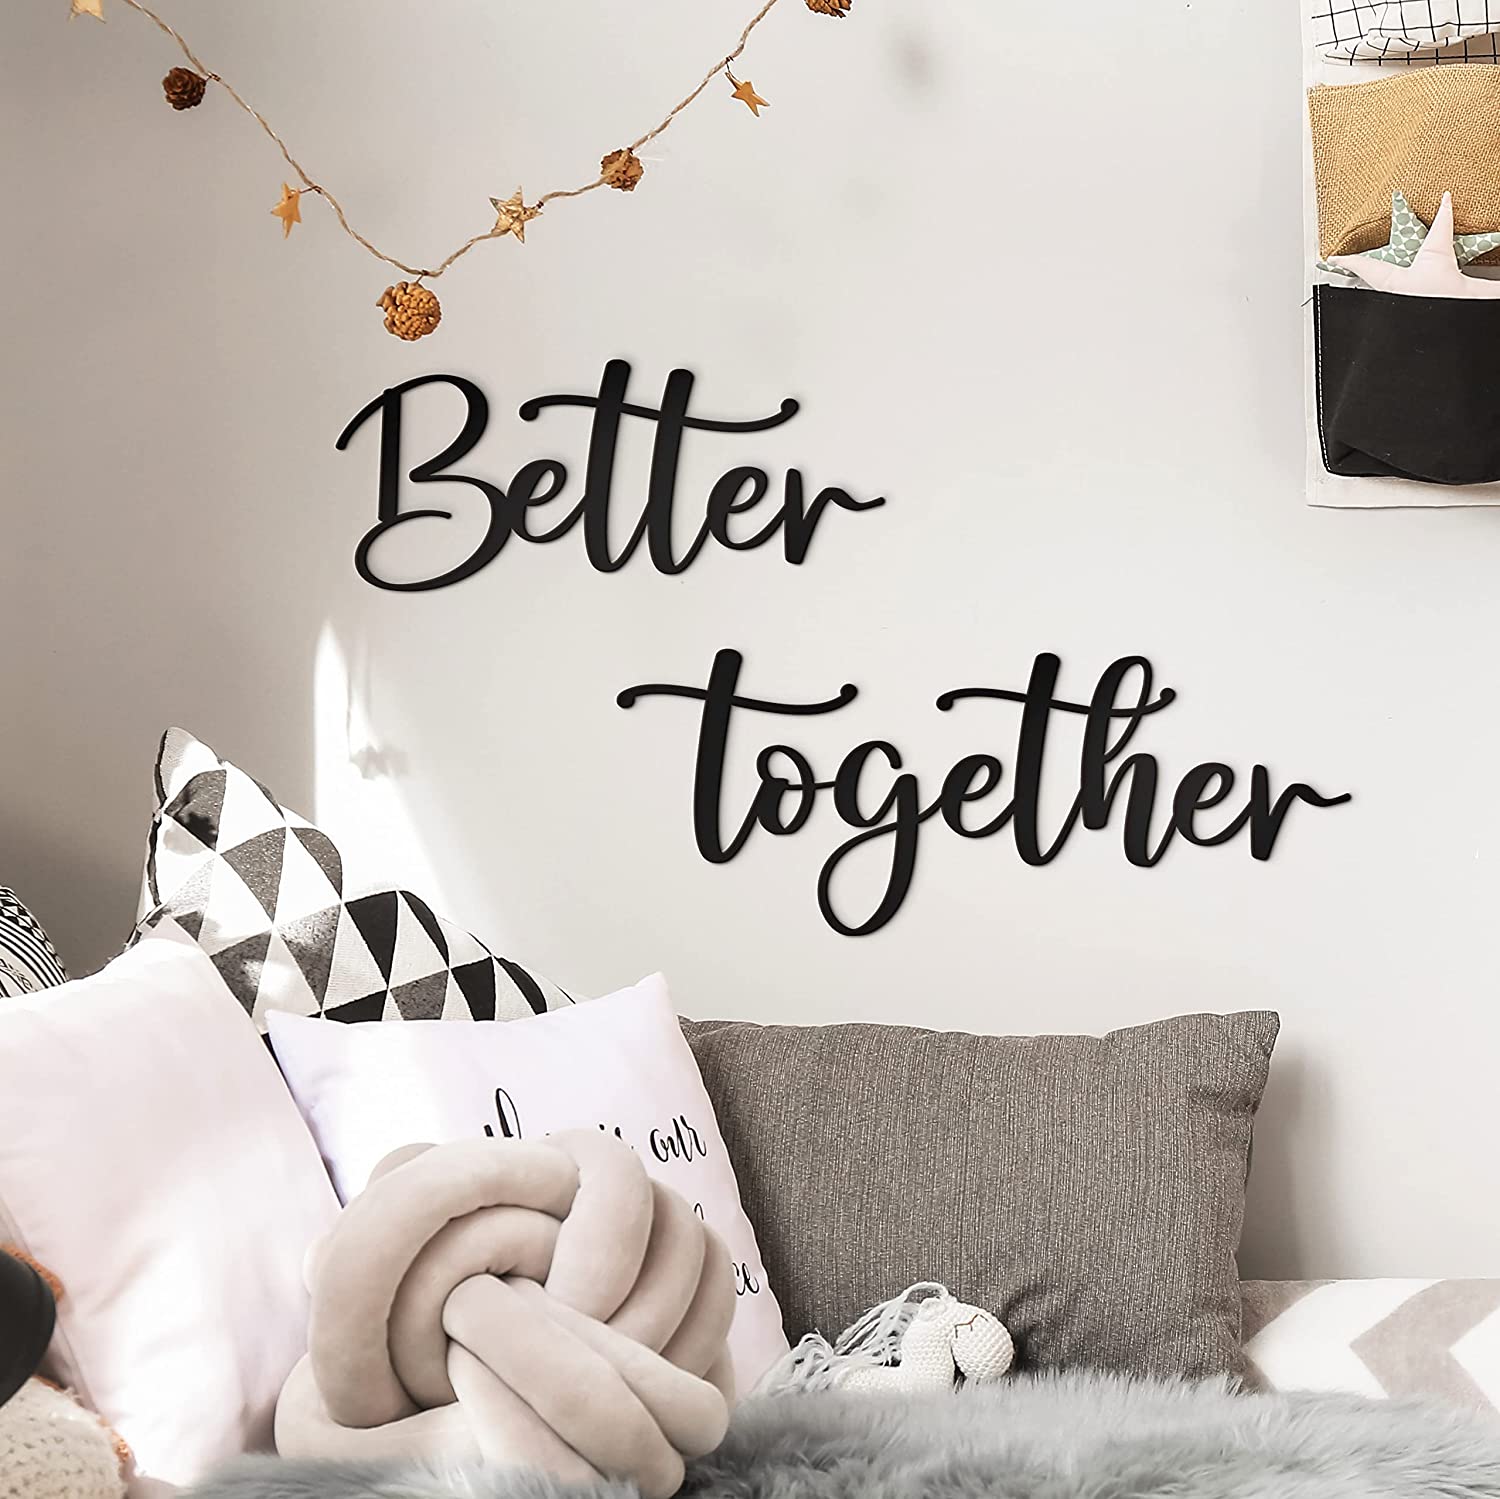 Better Together Sign Metal Wall Decor - 18"X16" Black Modern Better Together Farmhouse Metal Wall Signs for Hanging Home Wall Art Decor